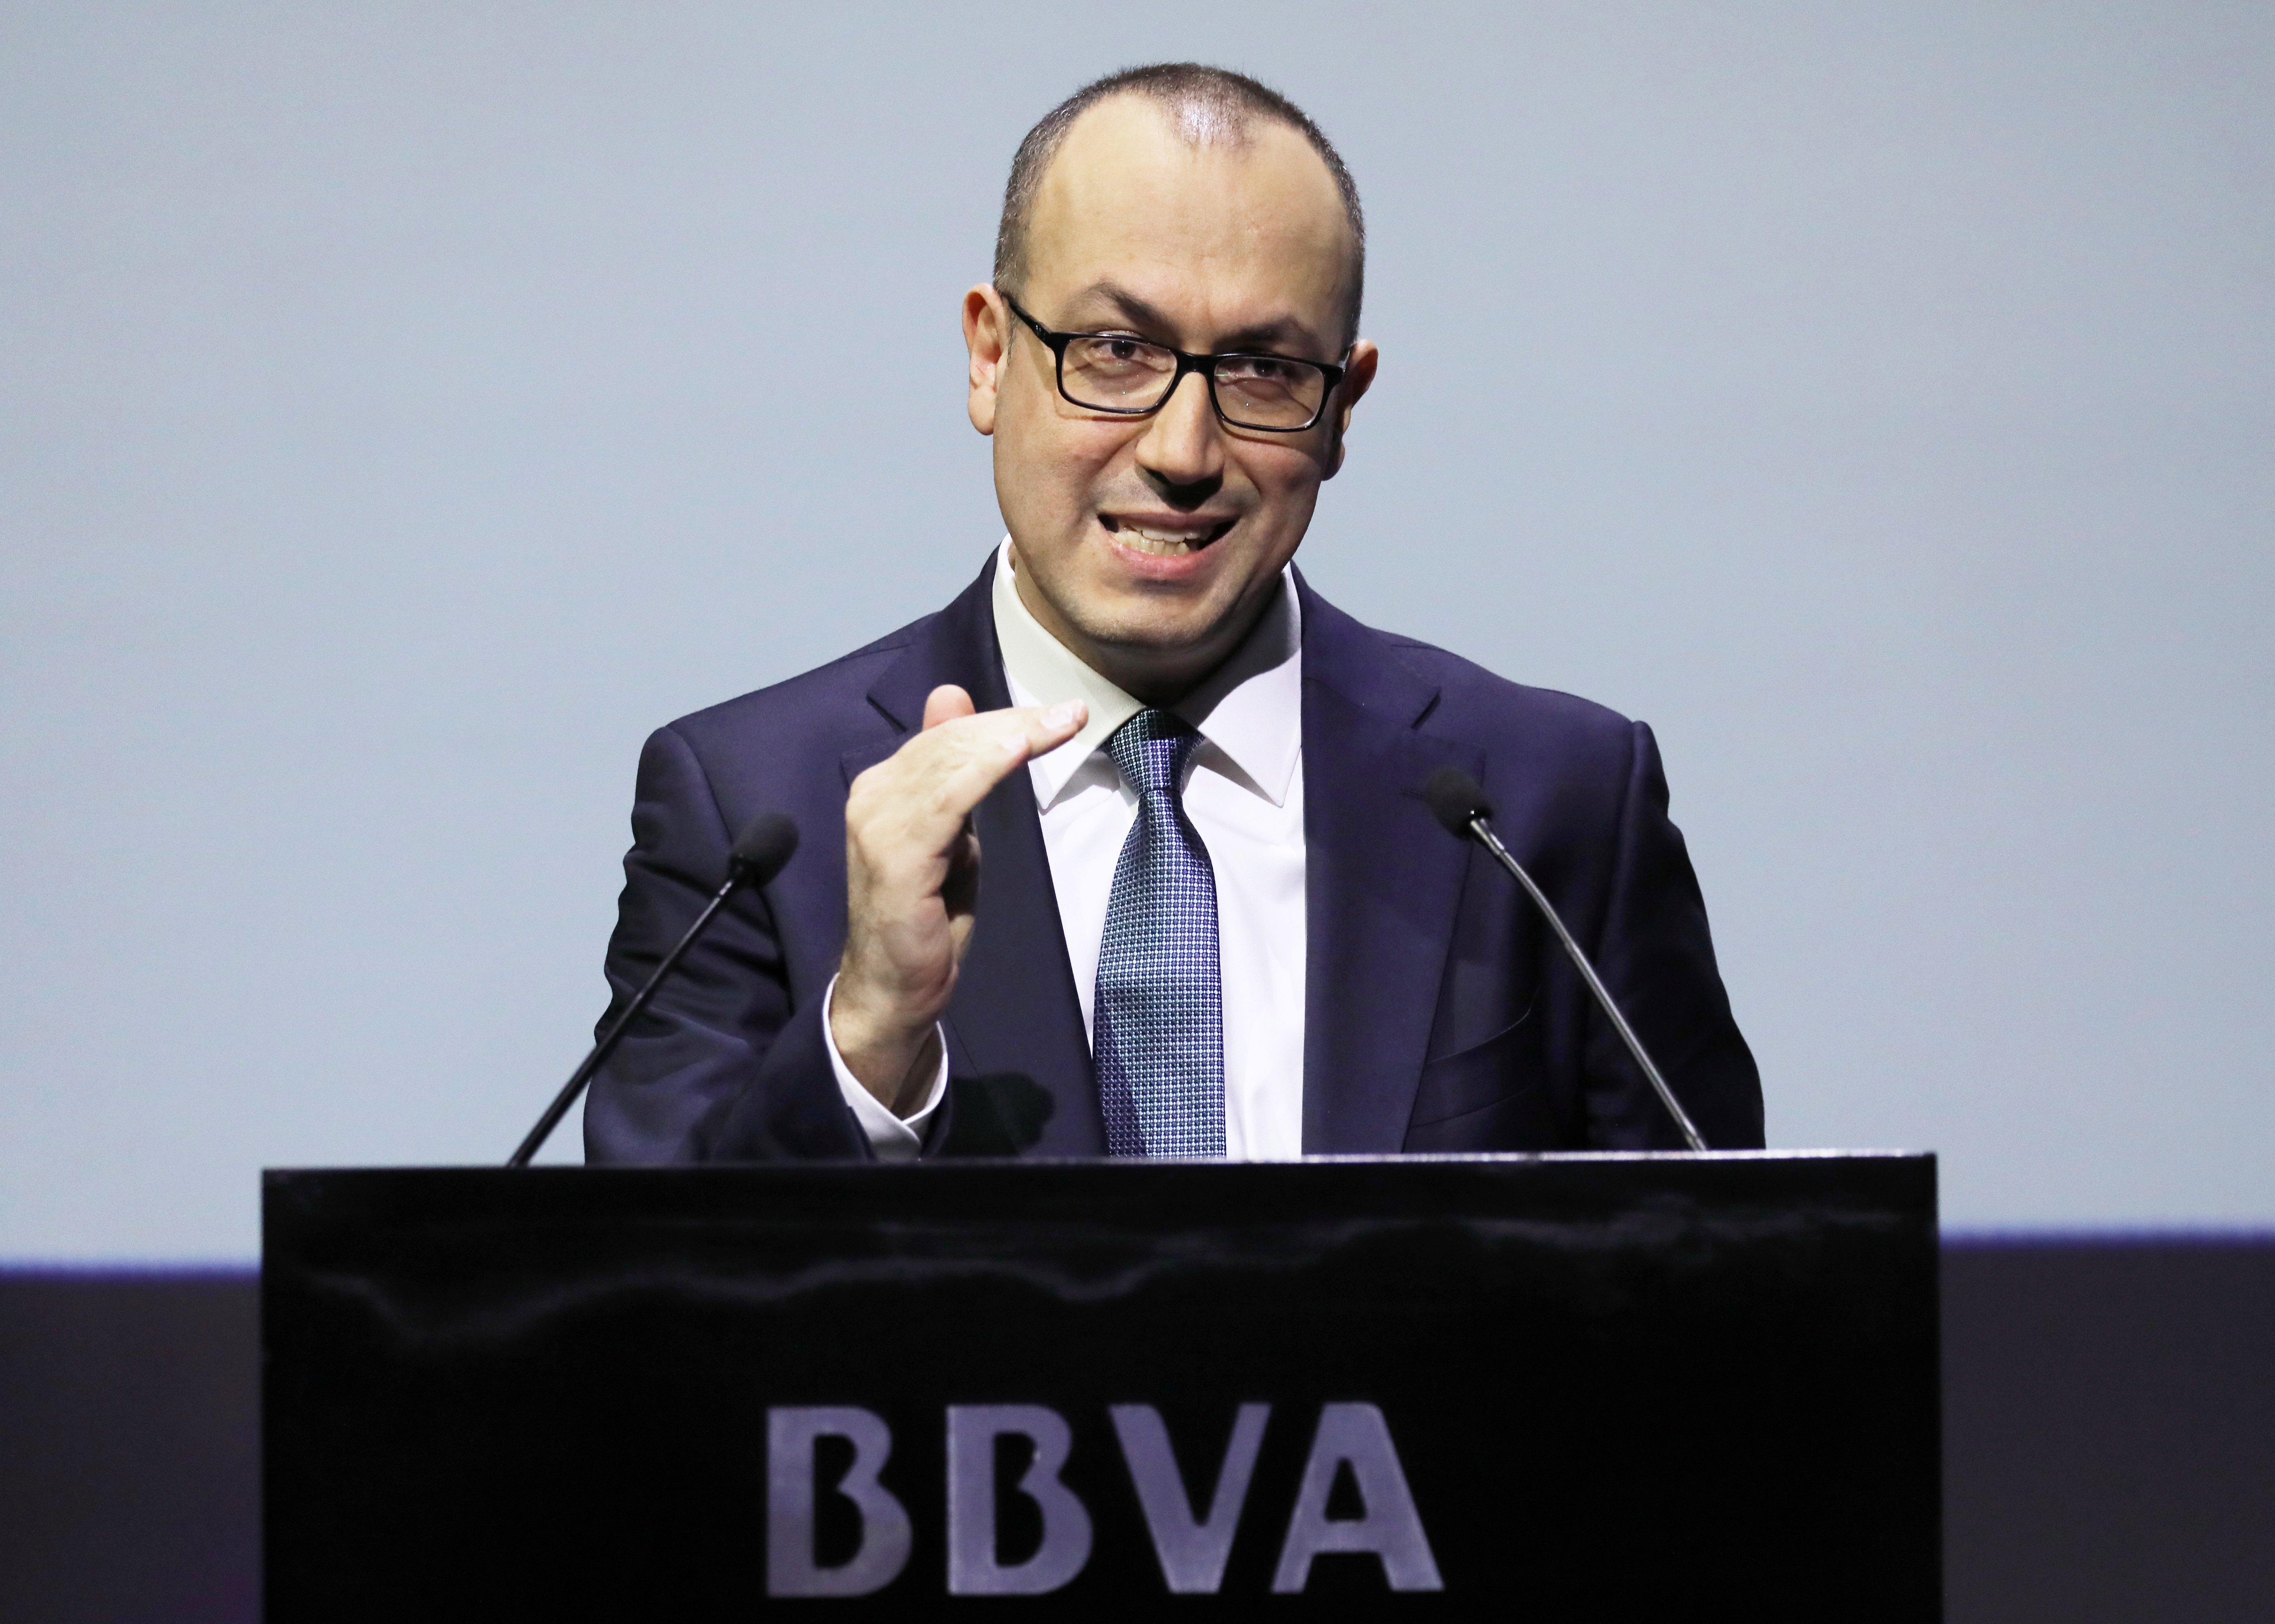 Spanish bank BBVA's Chief Executive Officer Onur Genc speaks during the annual results presentation at the company's headquarters in Madrid, Spain February 1, 2019. REUTERS/Sergio Perez/File Photo